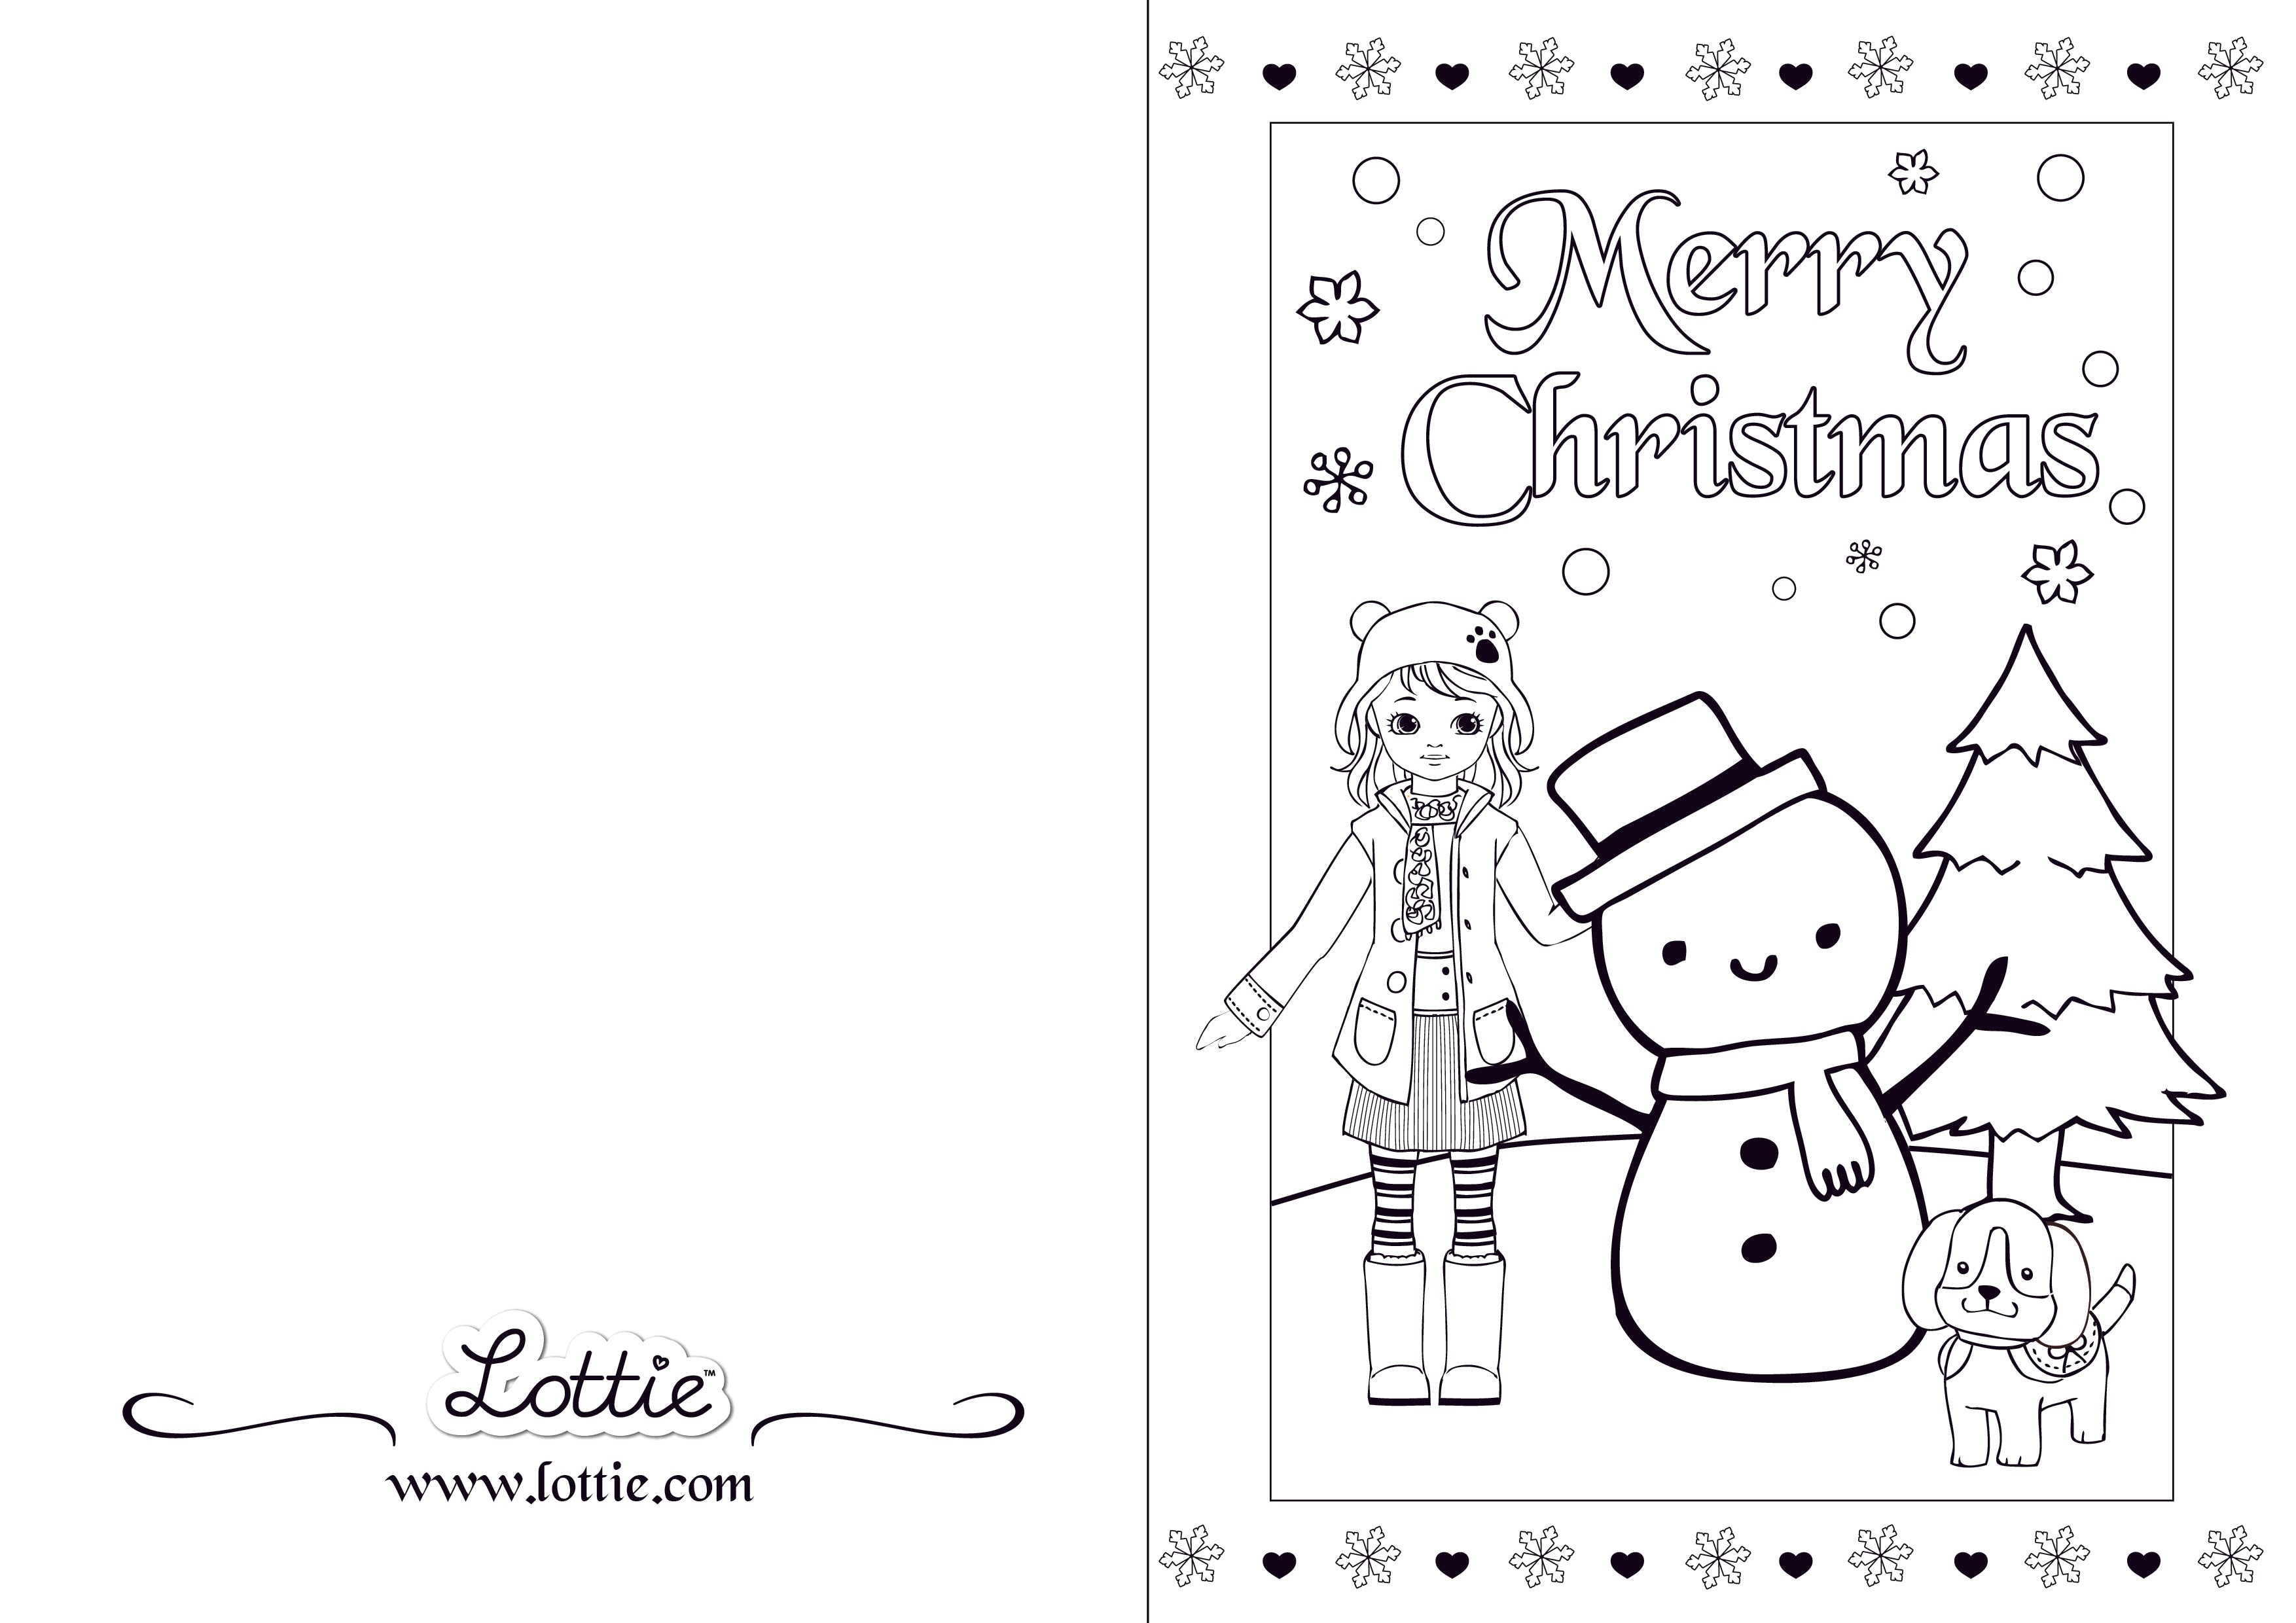 christmas-cards-colouring-pictures-10-best-free-printable-christmas